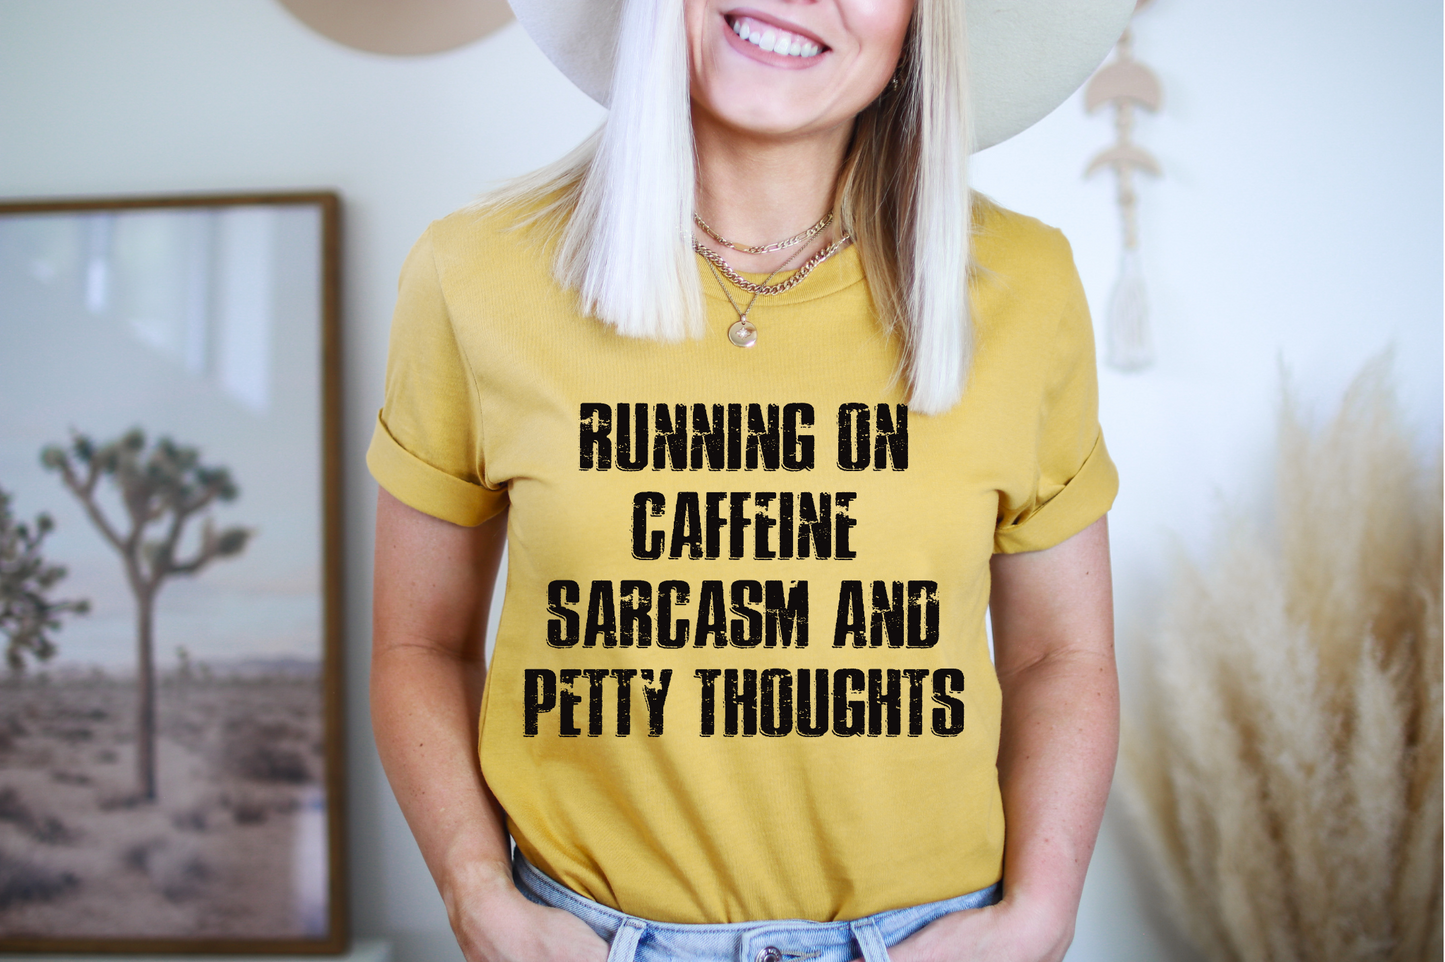 Running on caffeine sarcasm and petty thoughts